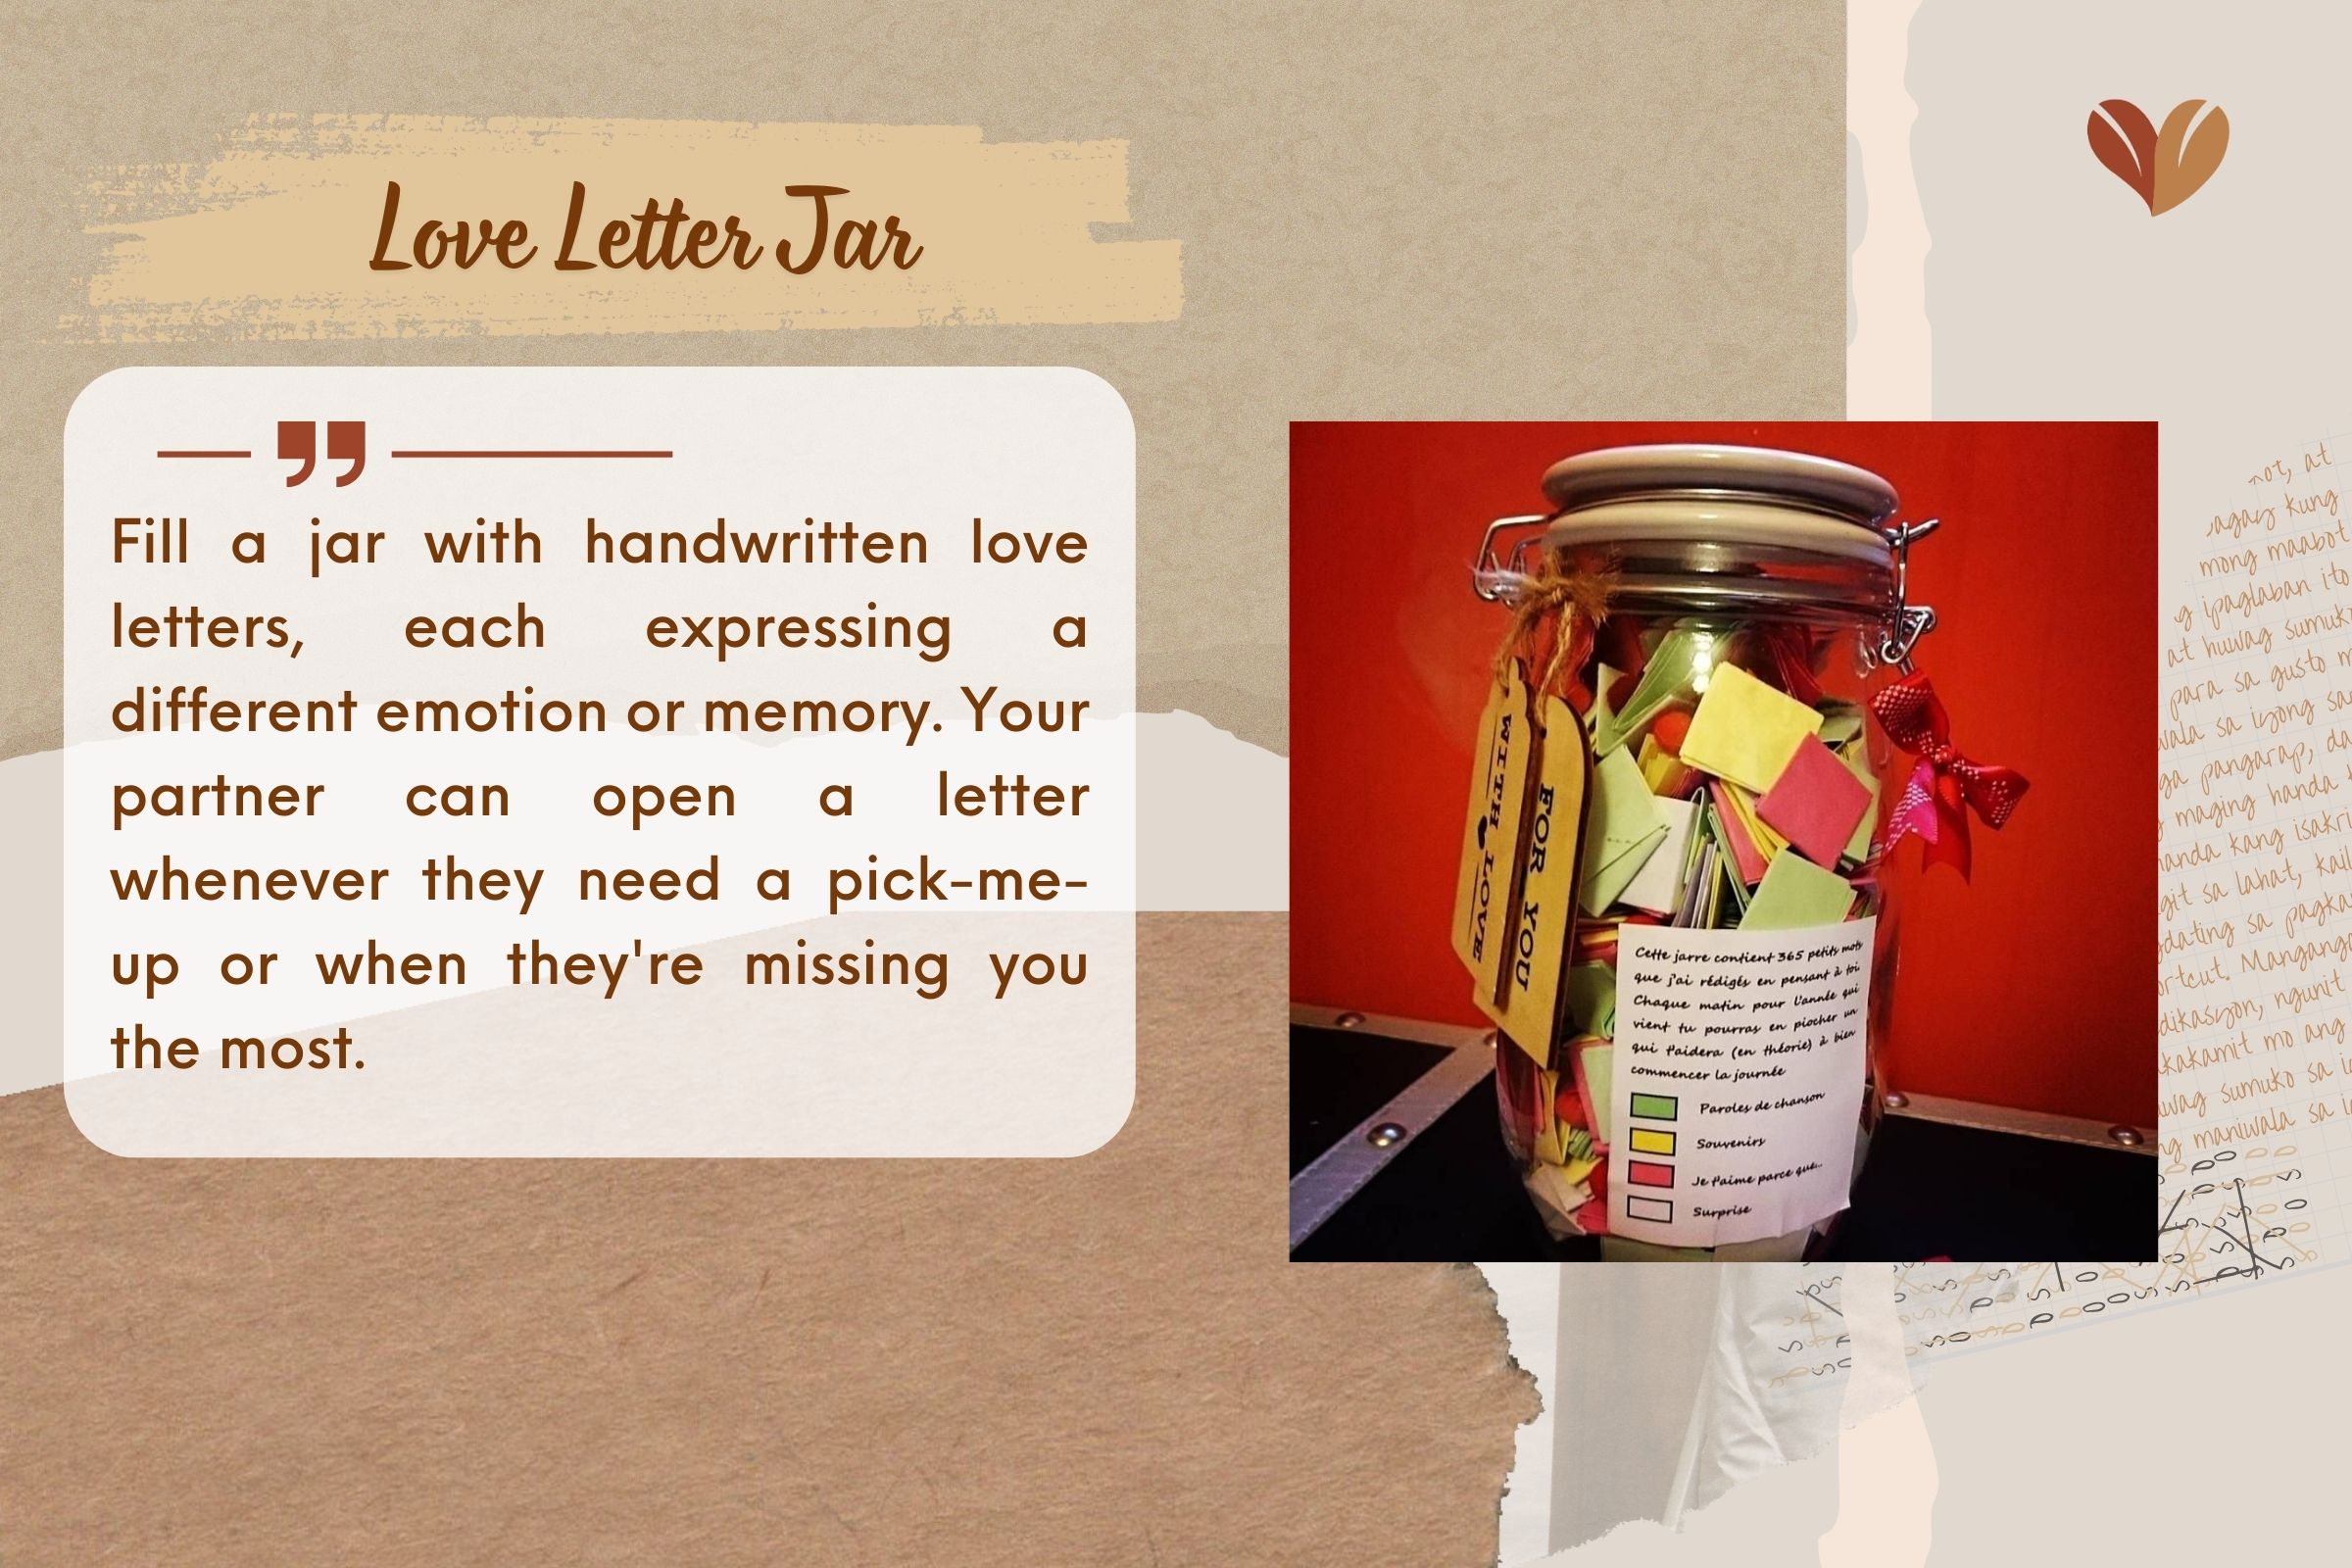 Fill a jar with handwritten love letters